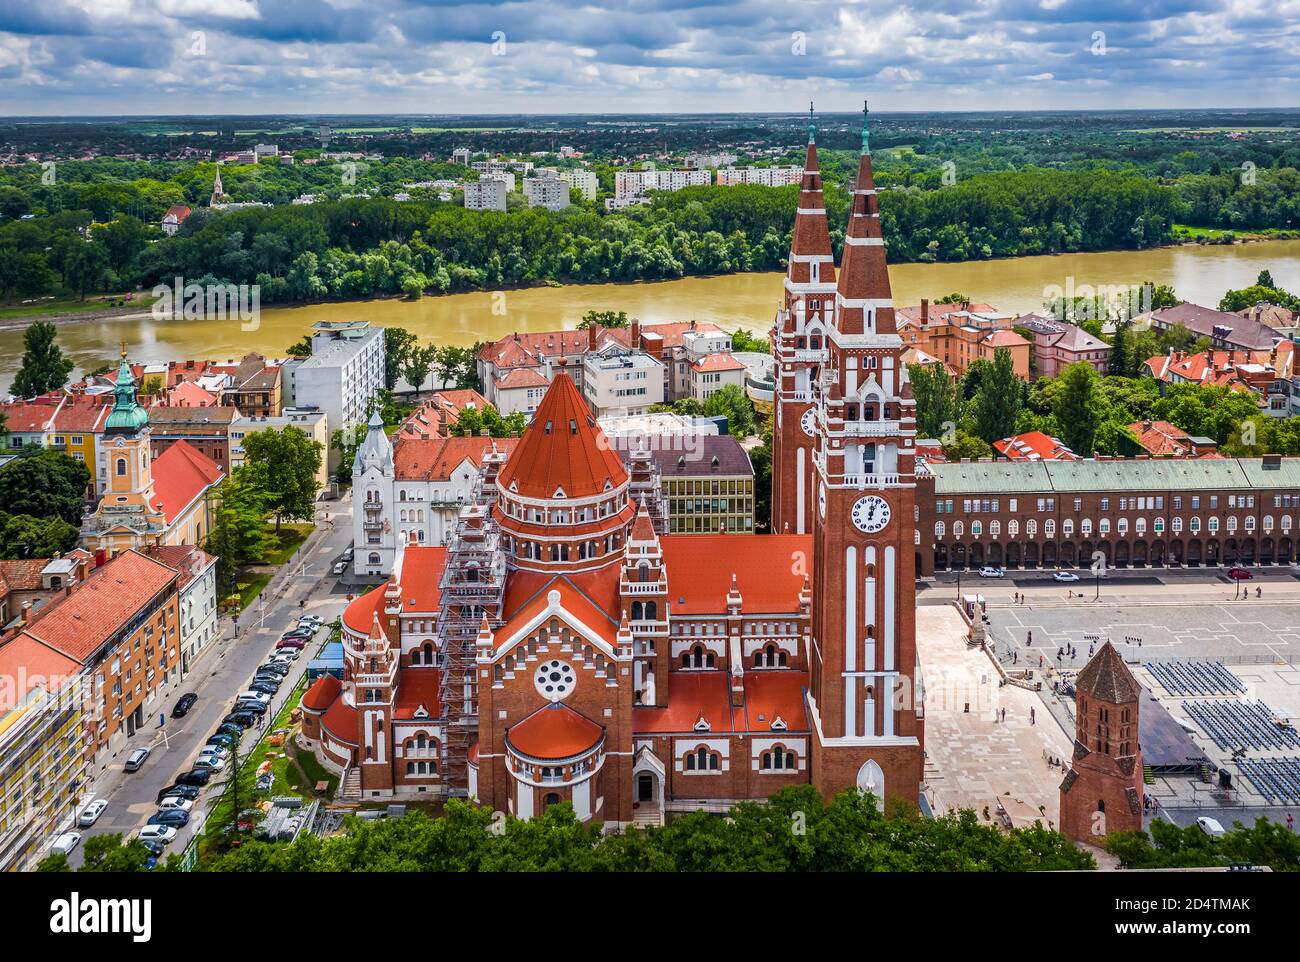 Szeged, Hungary - Aerial view of the Votive Church and Cathedral of Our Lady of Hungary (Szeged Dom) on a sunny summer day with River Tisza and blue s Stock Photo